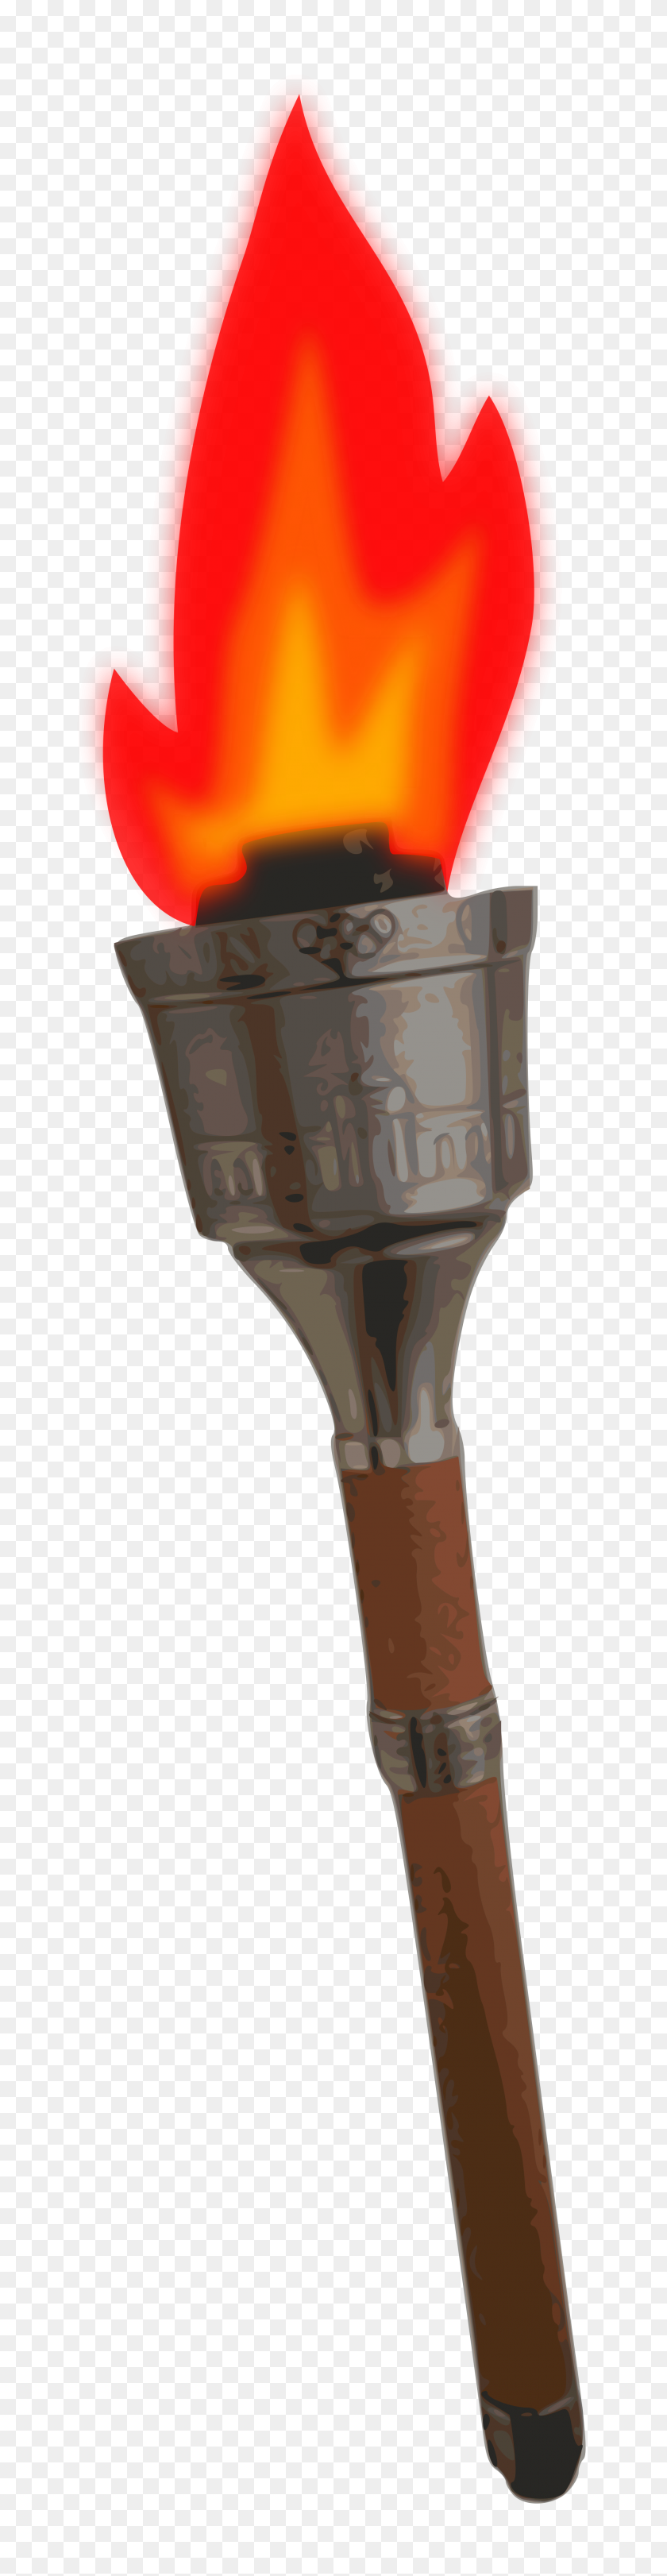 2000x8162 Olympic Torch - Torch PNG